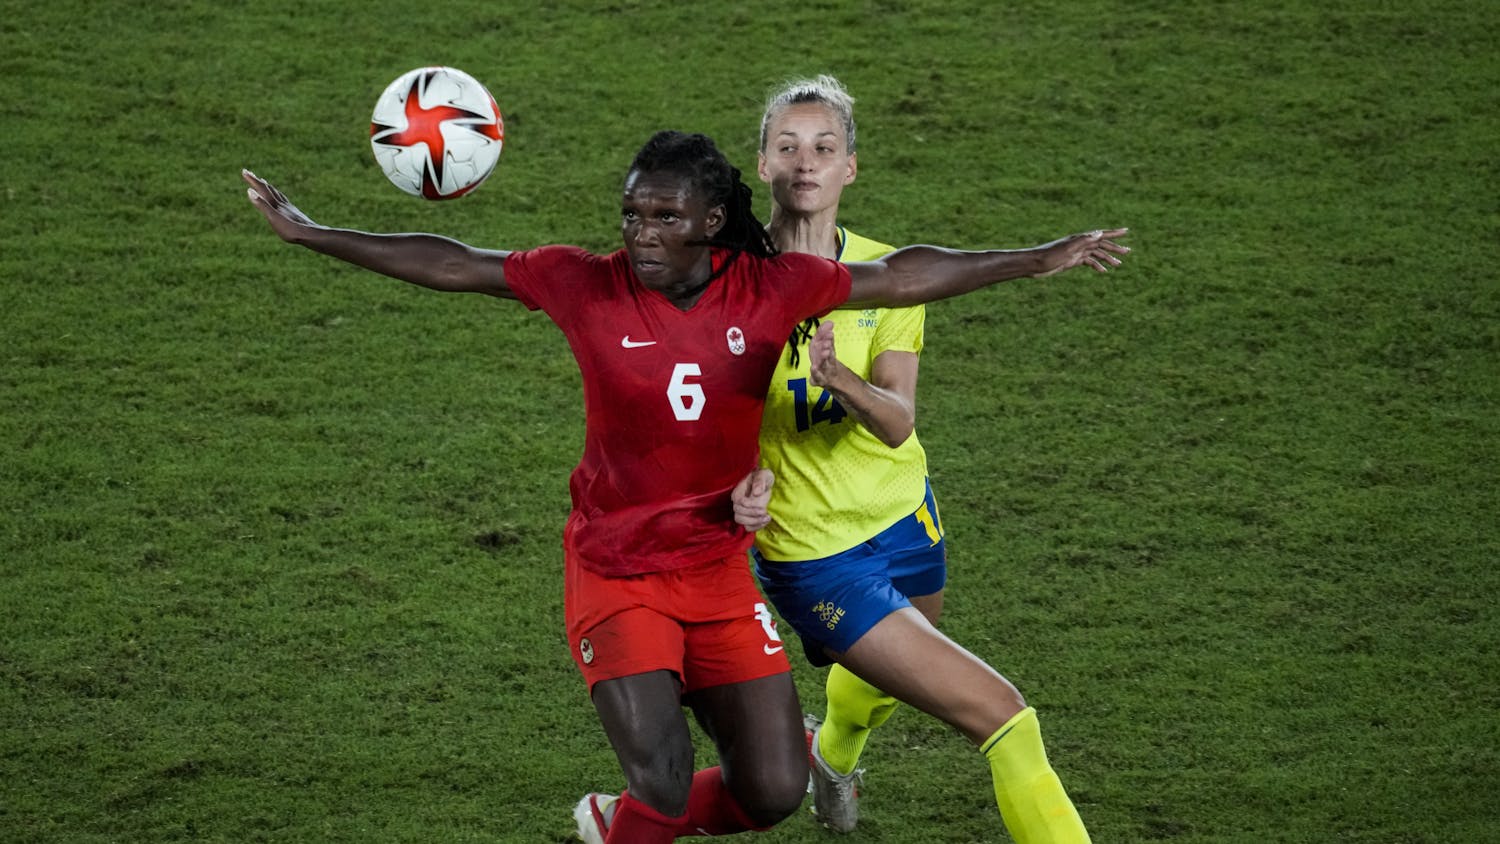 Canada's Deanne Rose duels for the ball with Sweden's Nathalie Bjorn during the women's final soccer match at the 2020 Summer Olympics, Friday, Aug. 6, 2021, in Yokohama, Japan. (AP Photo/Kiichiro Sato)